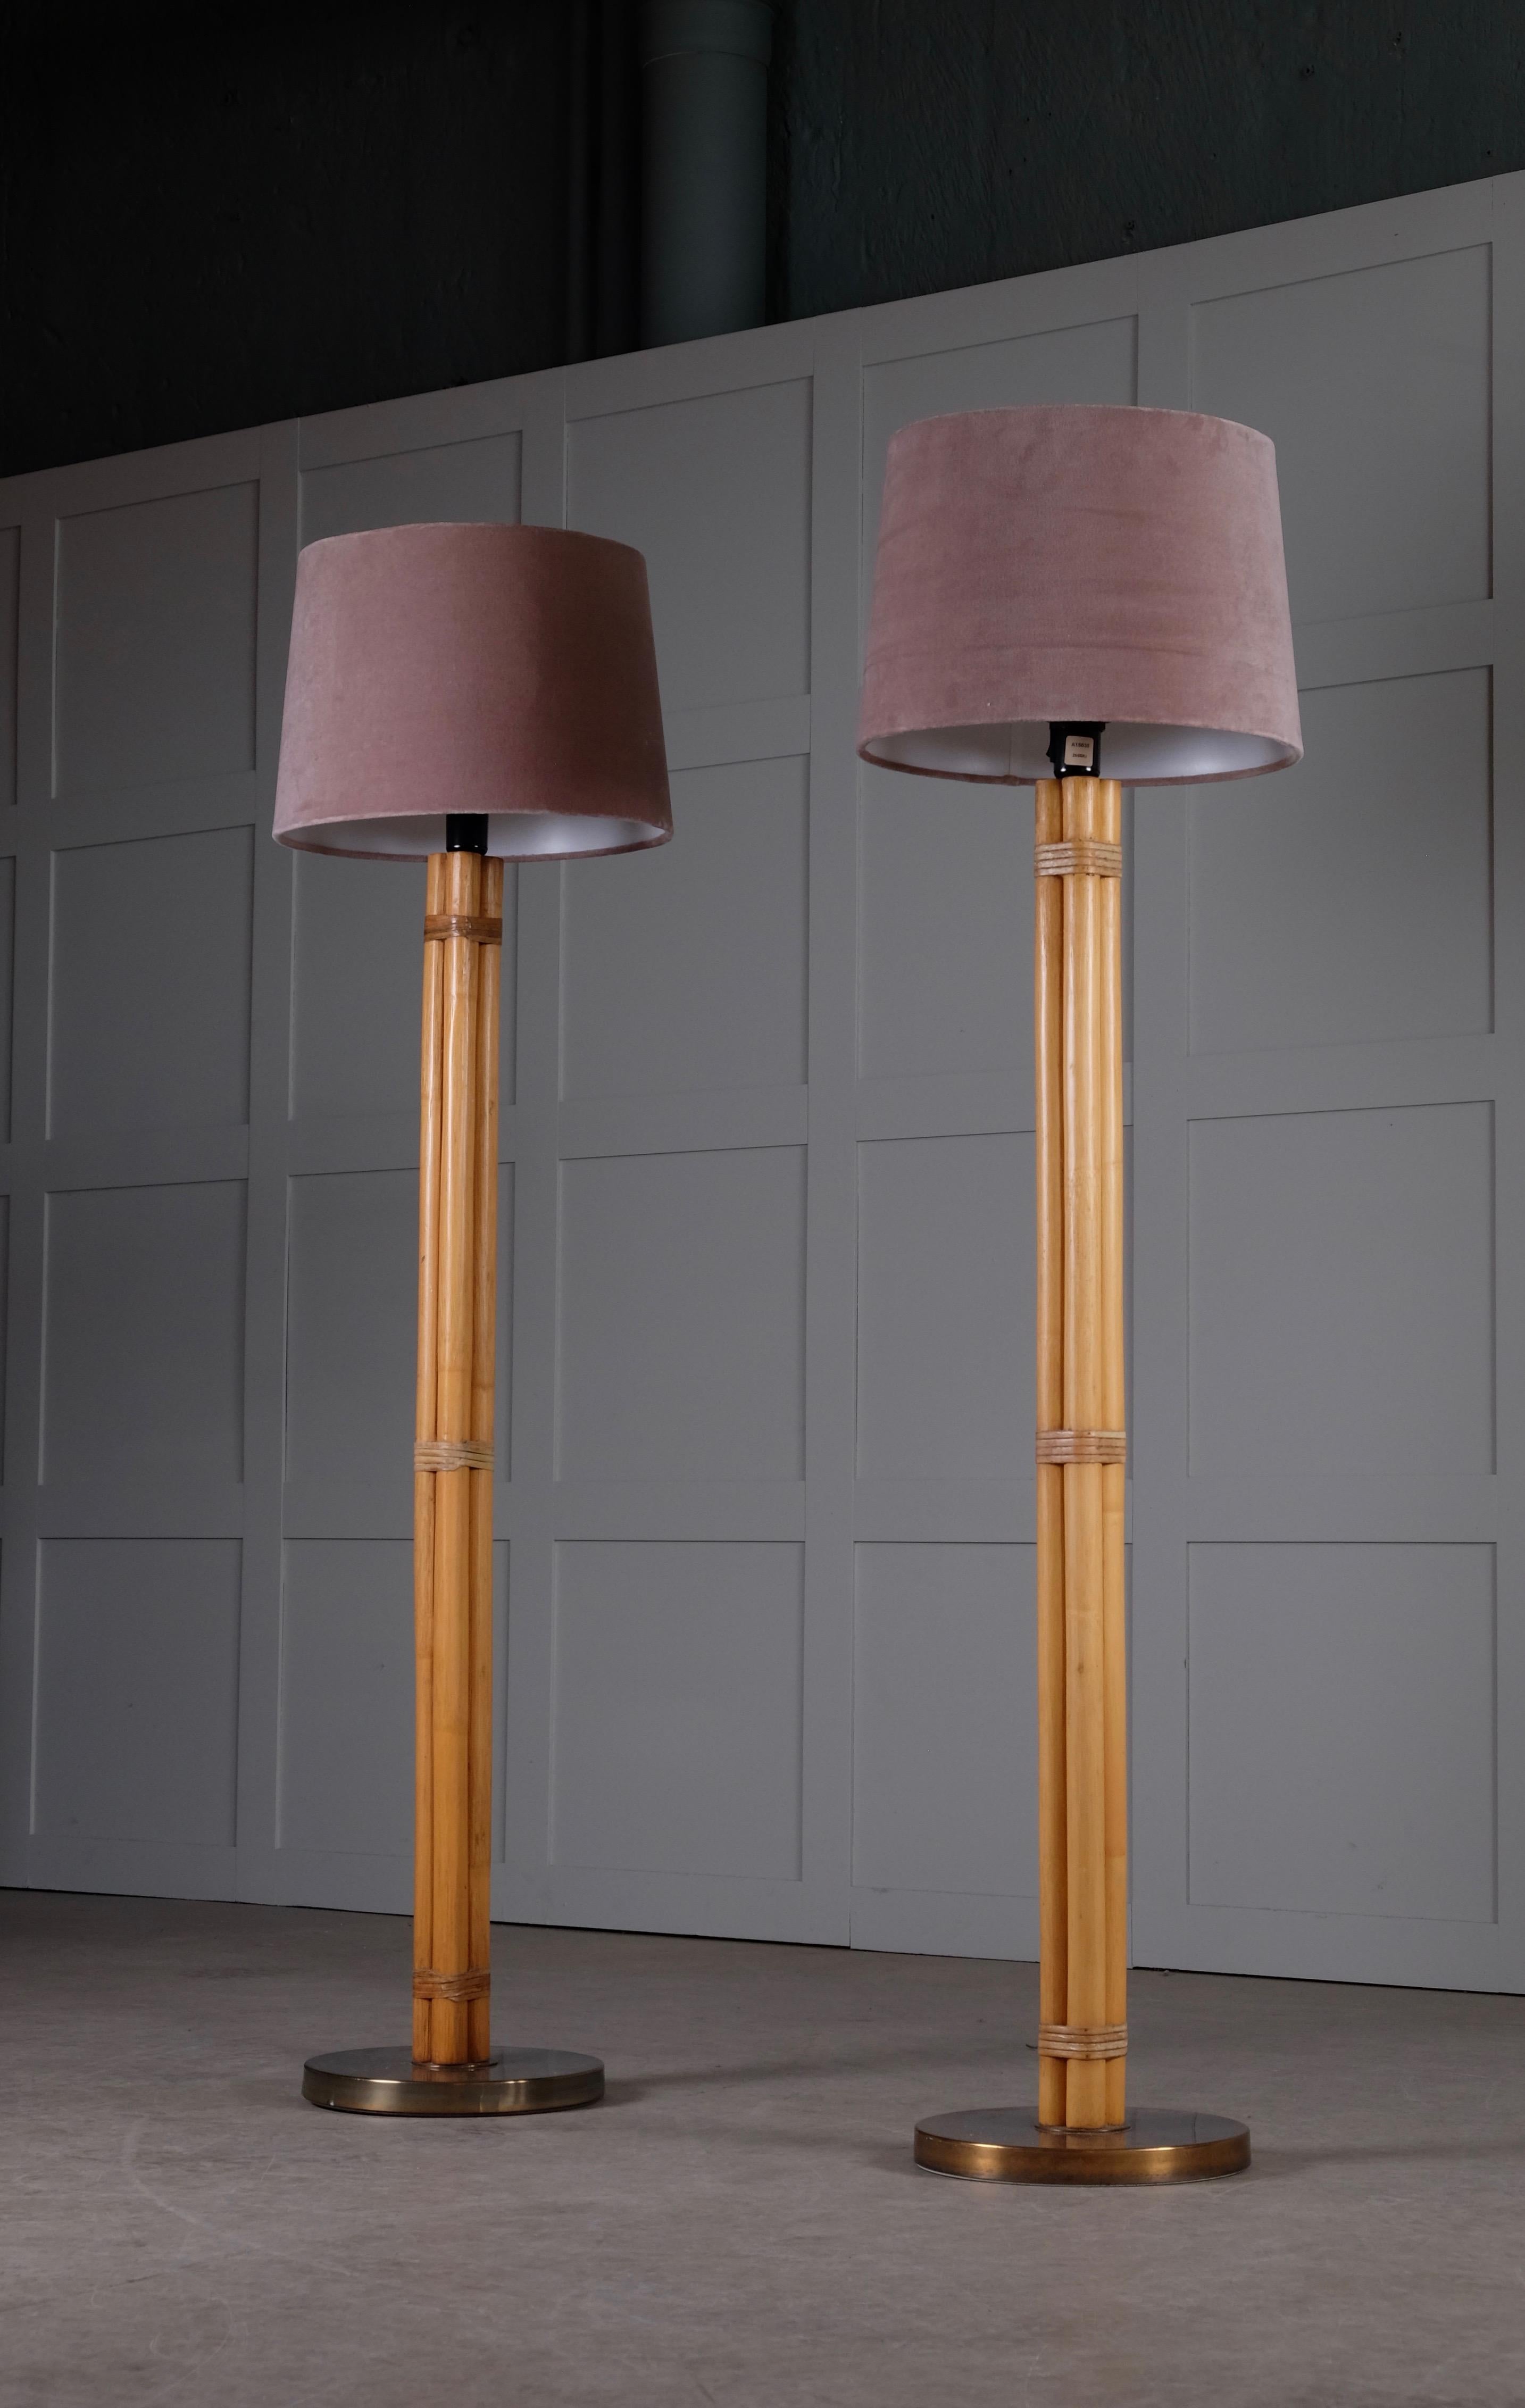 Pair of Swedish Brass and Bamboo Floor Lamps by Bergboms, 1970s For Sale 5